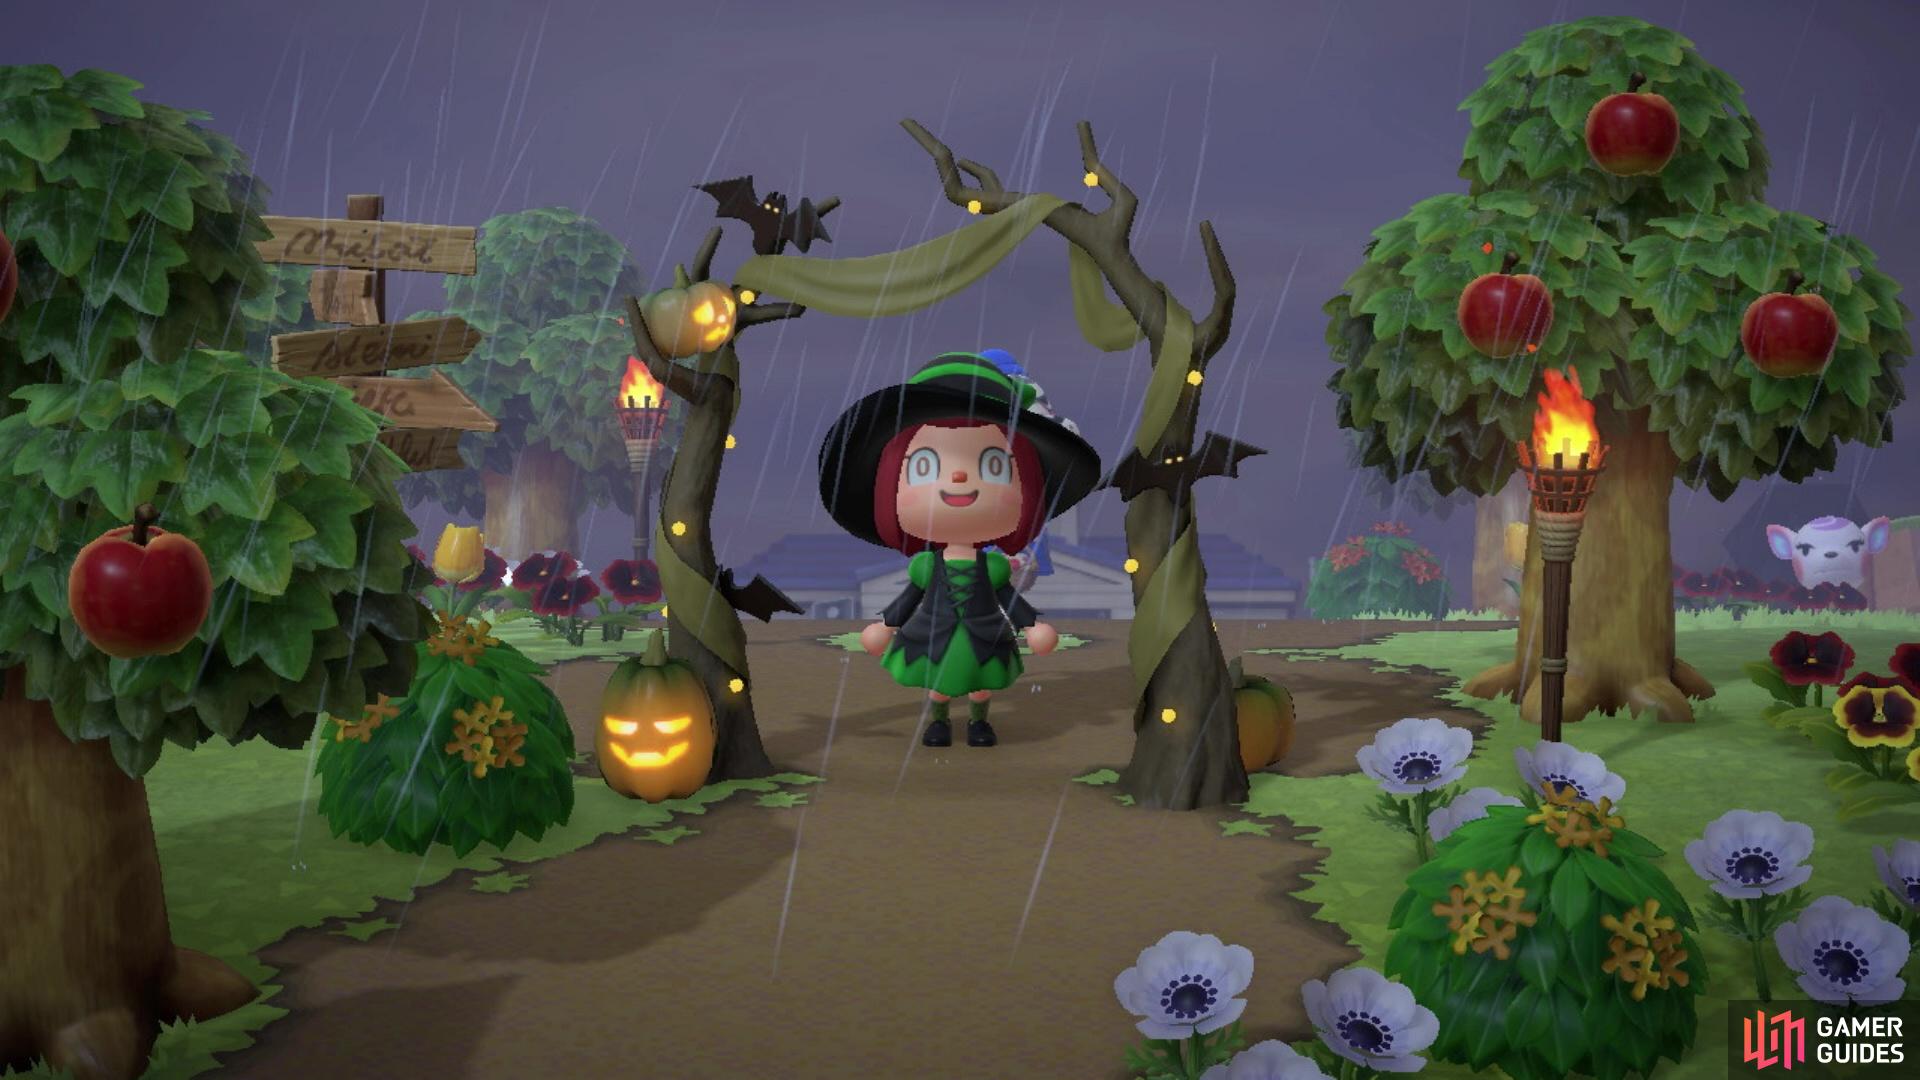 It's Halloween! Time to get spooky!